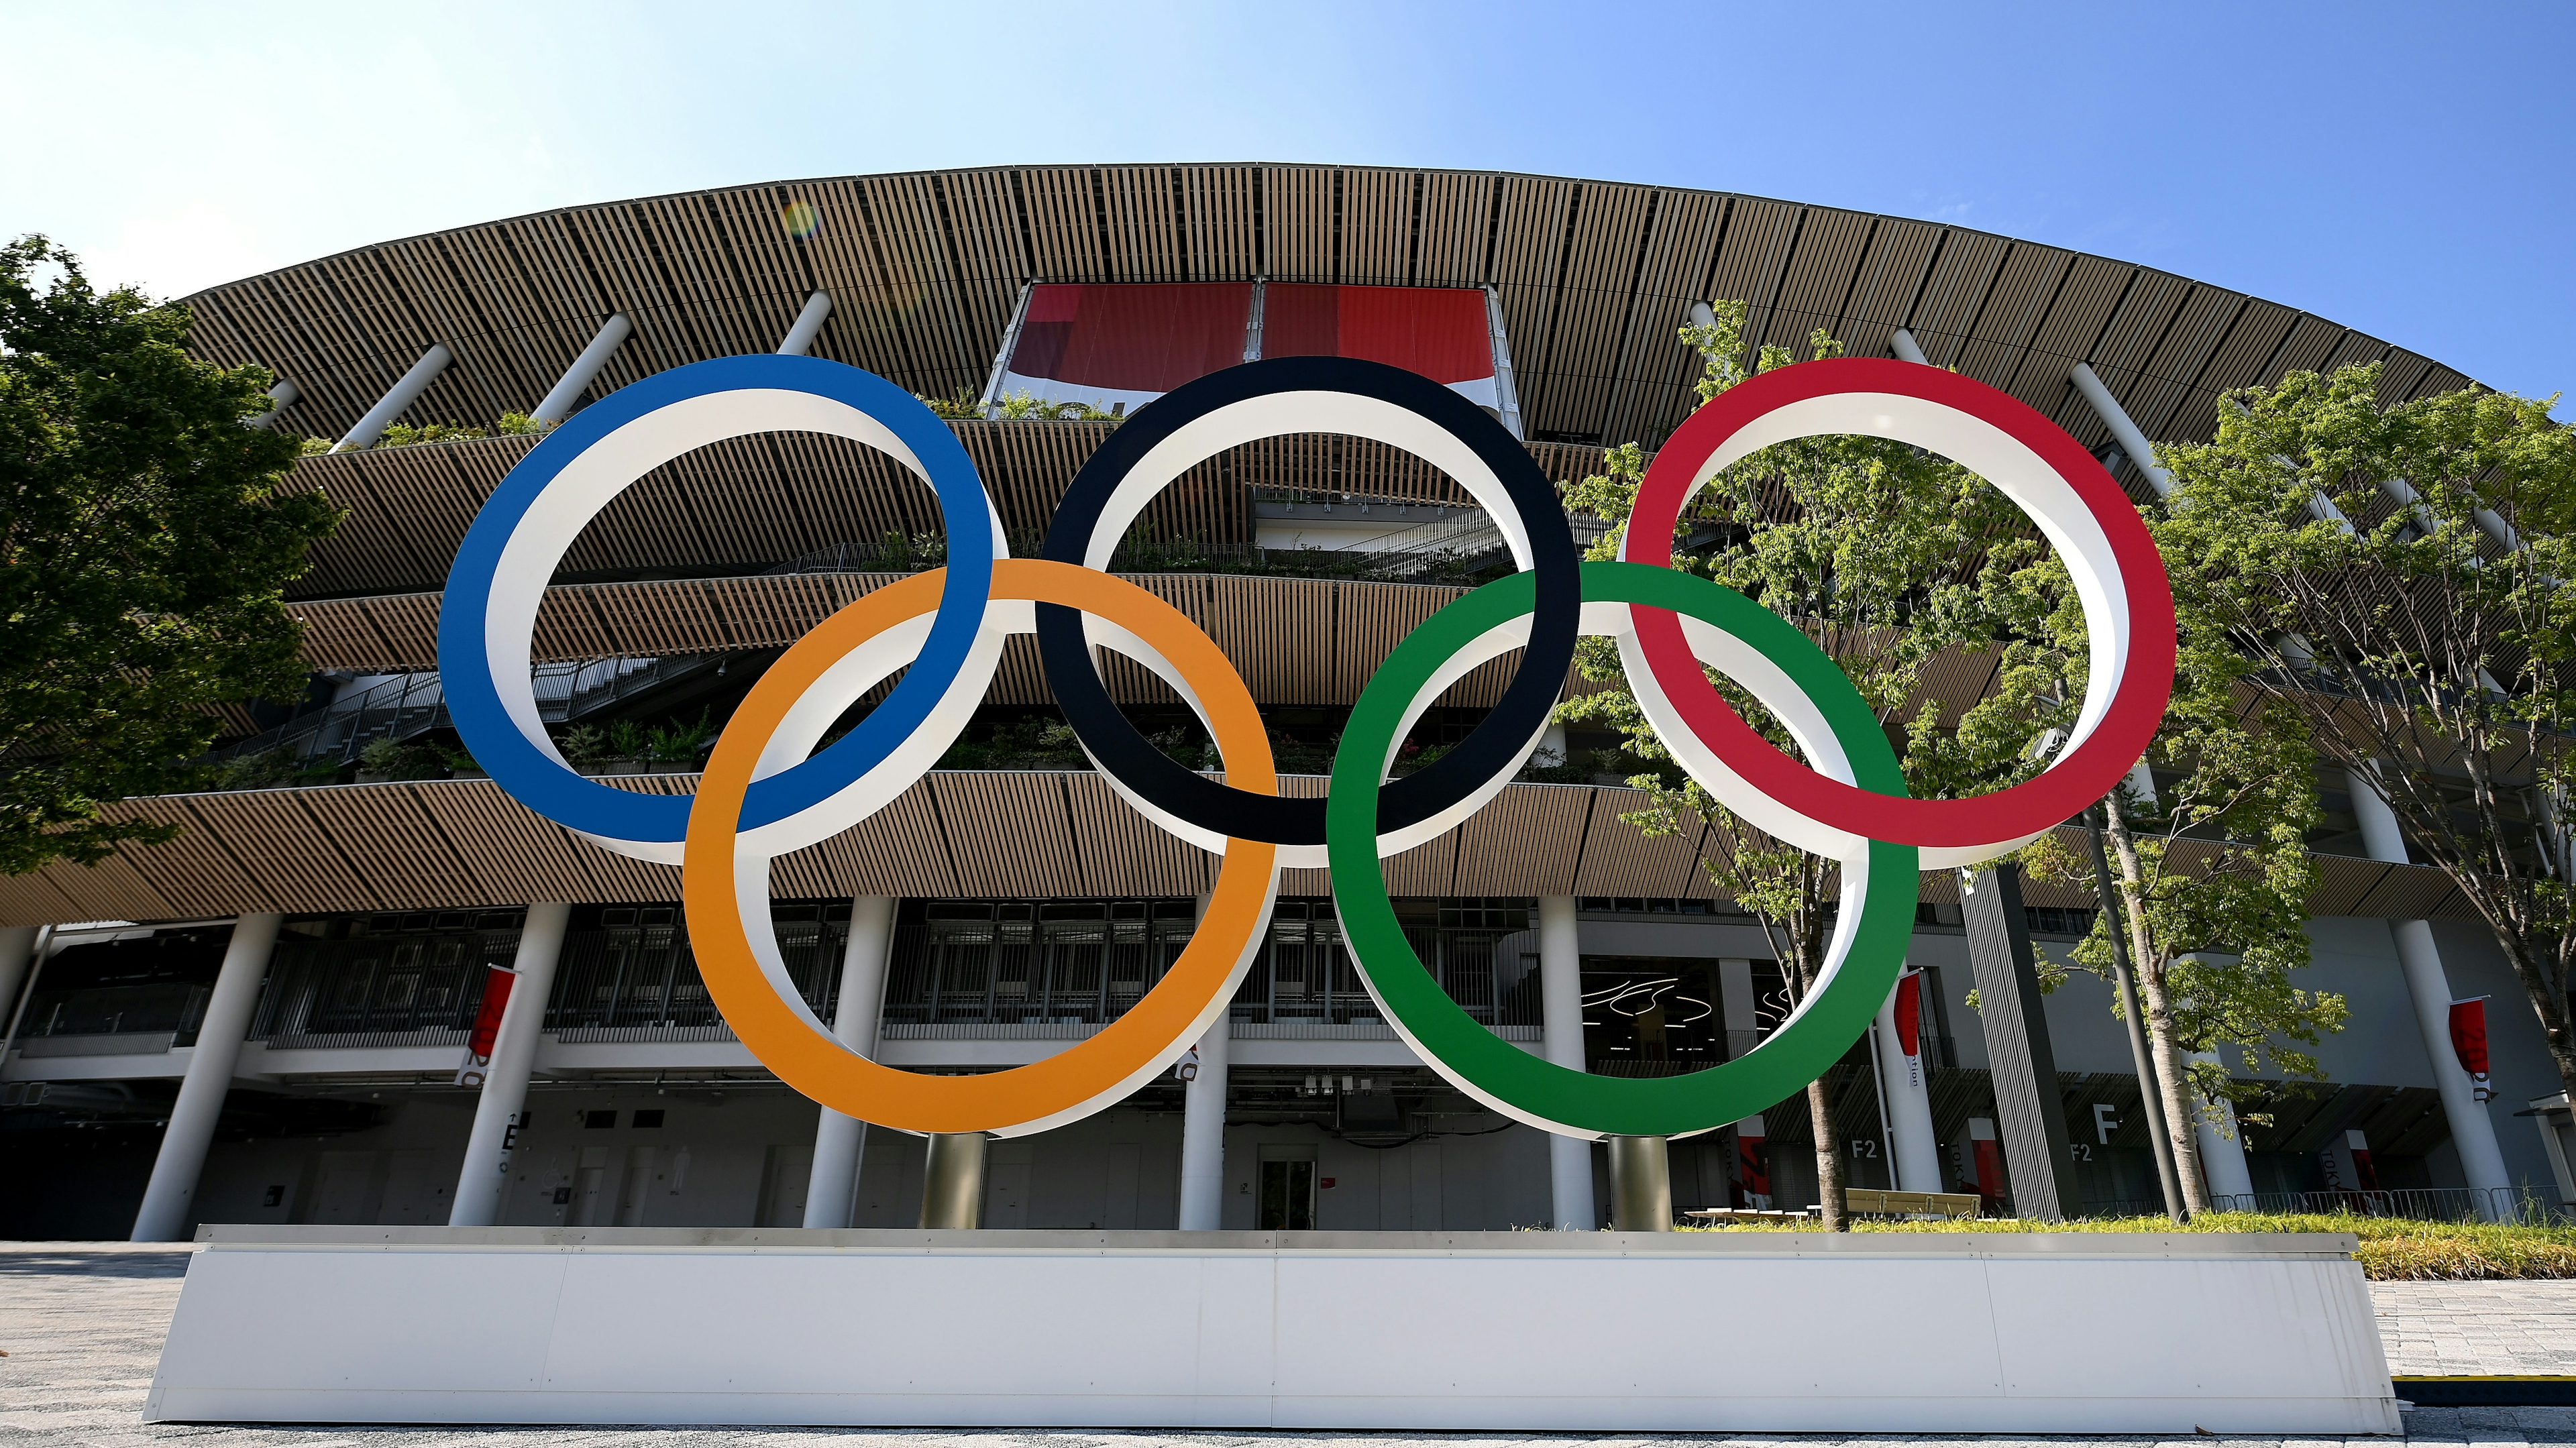 The Olympic rings outside of the stadium prior to the Opening Ceremony